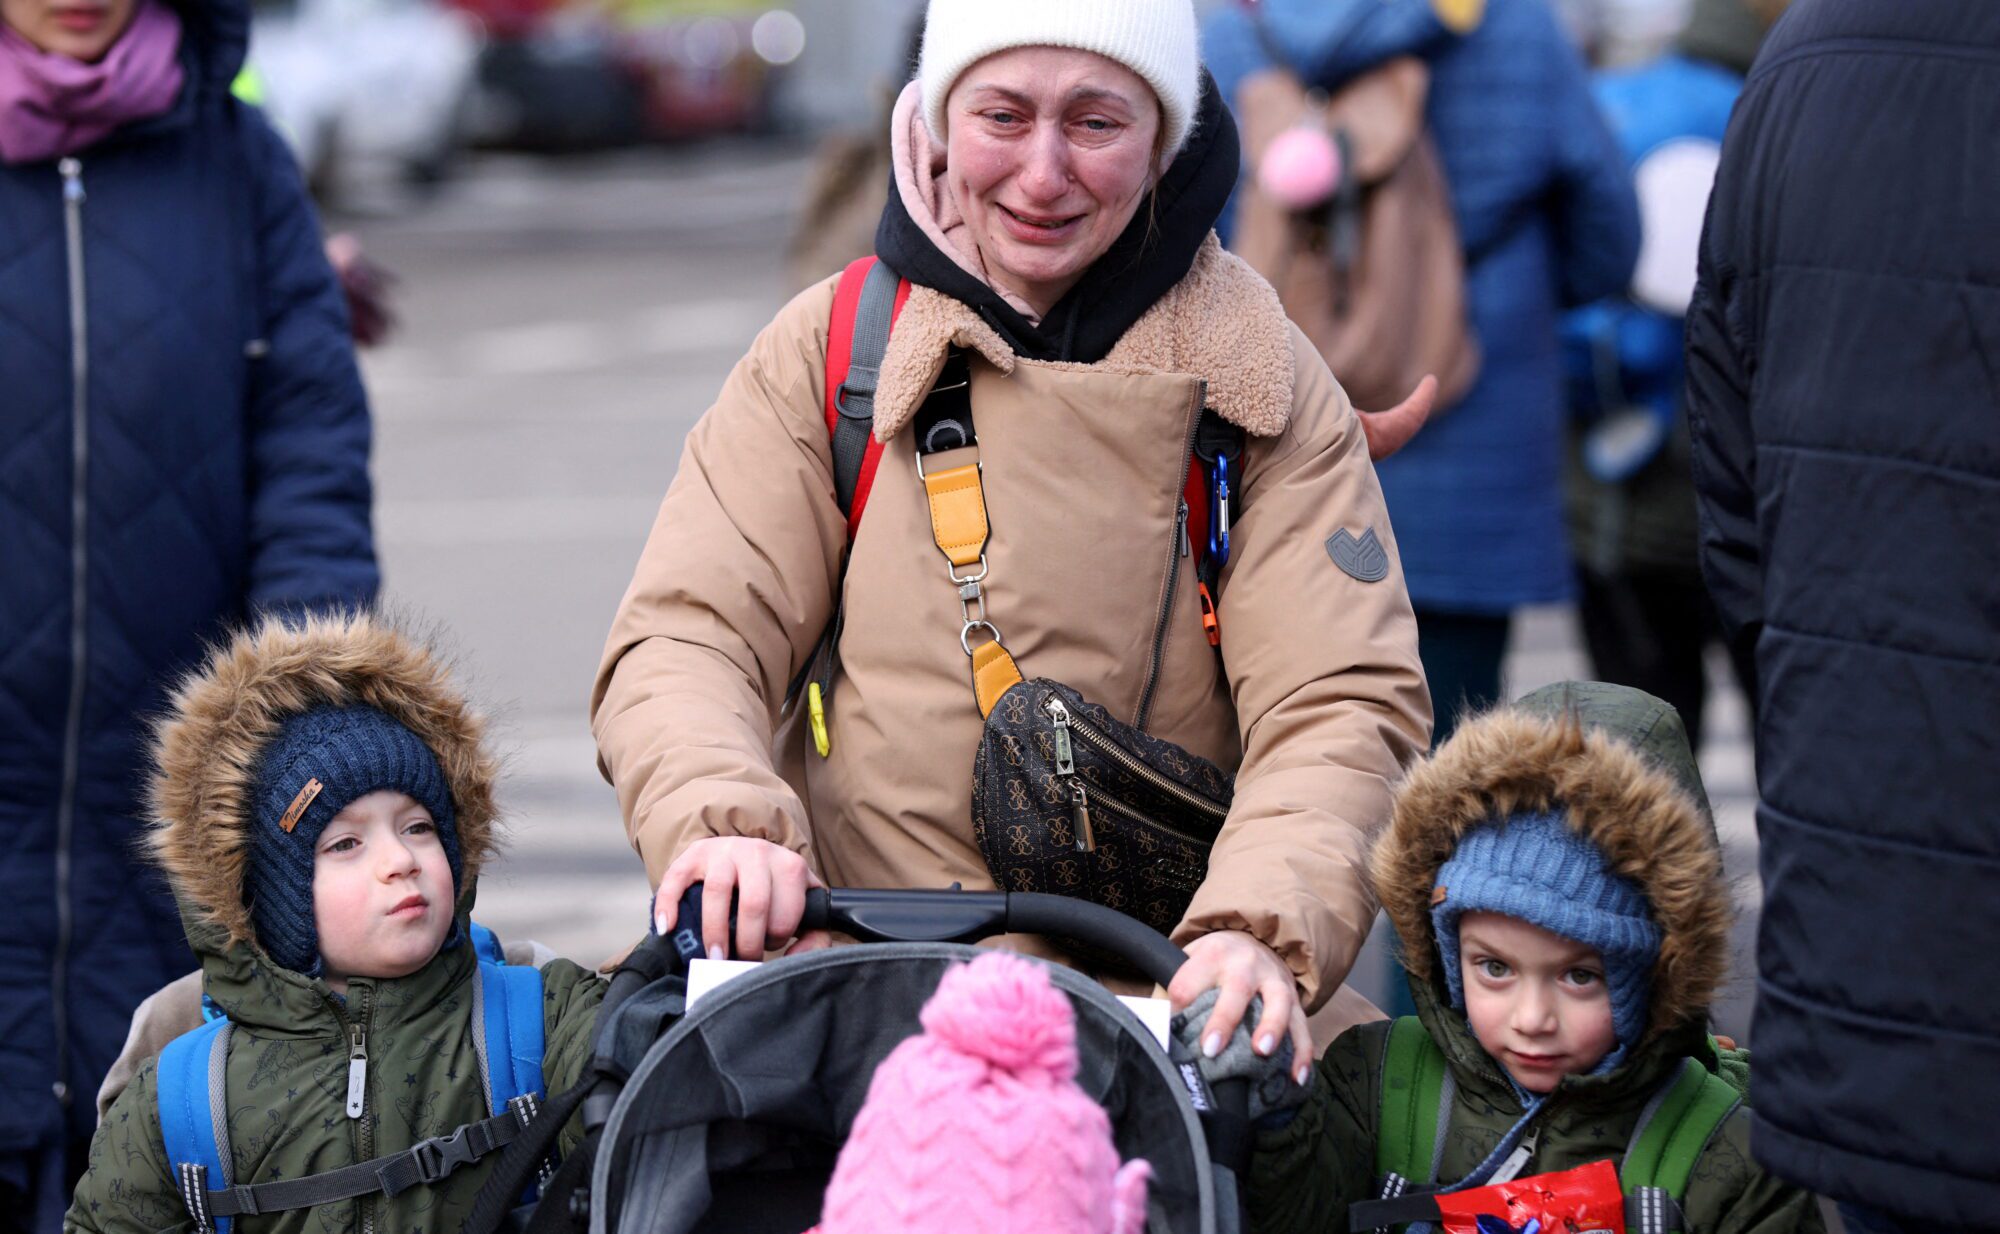 A woman cries next to her children last winter after fleeing from Russia's invasion of Ukraine, at the border crossing in Siret, Romania, February 28, 2022. REUTERS/Stoyan Nenov